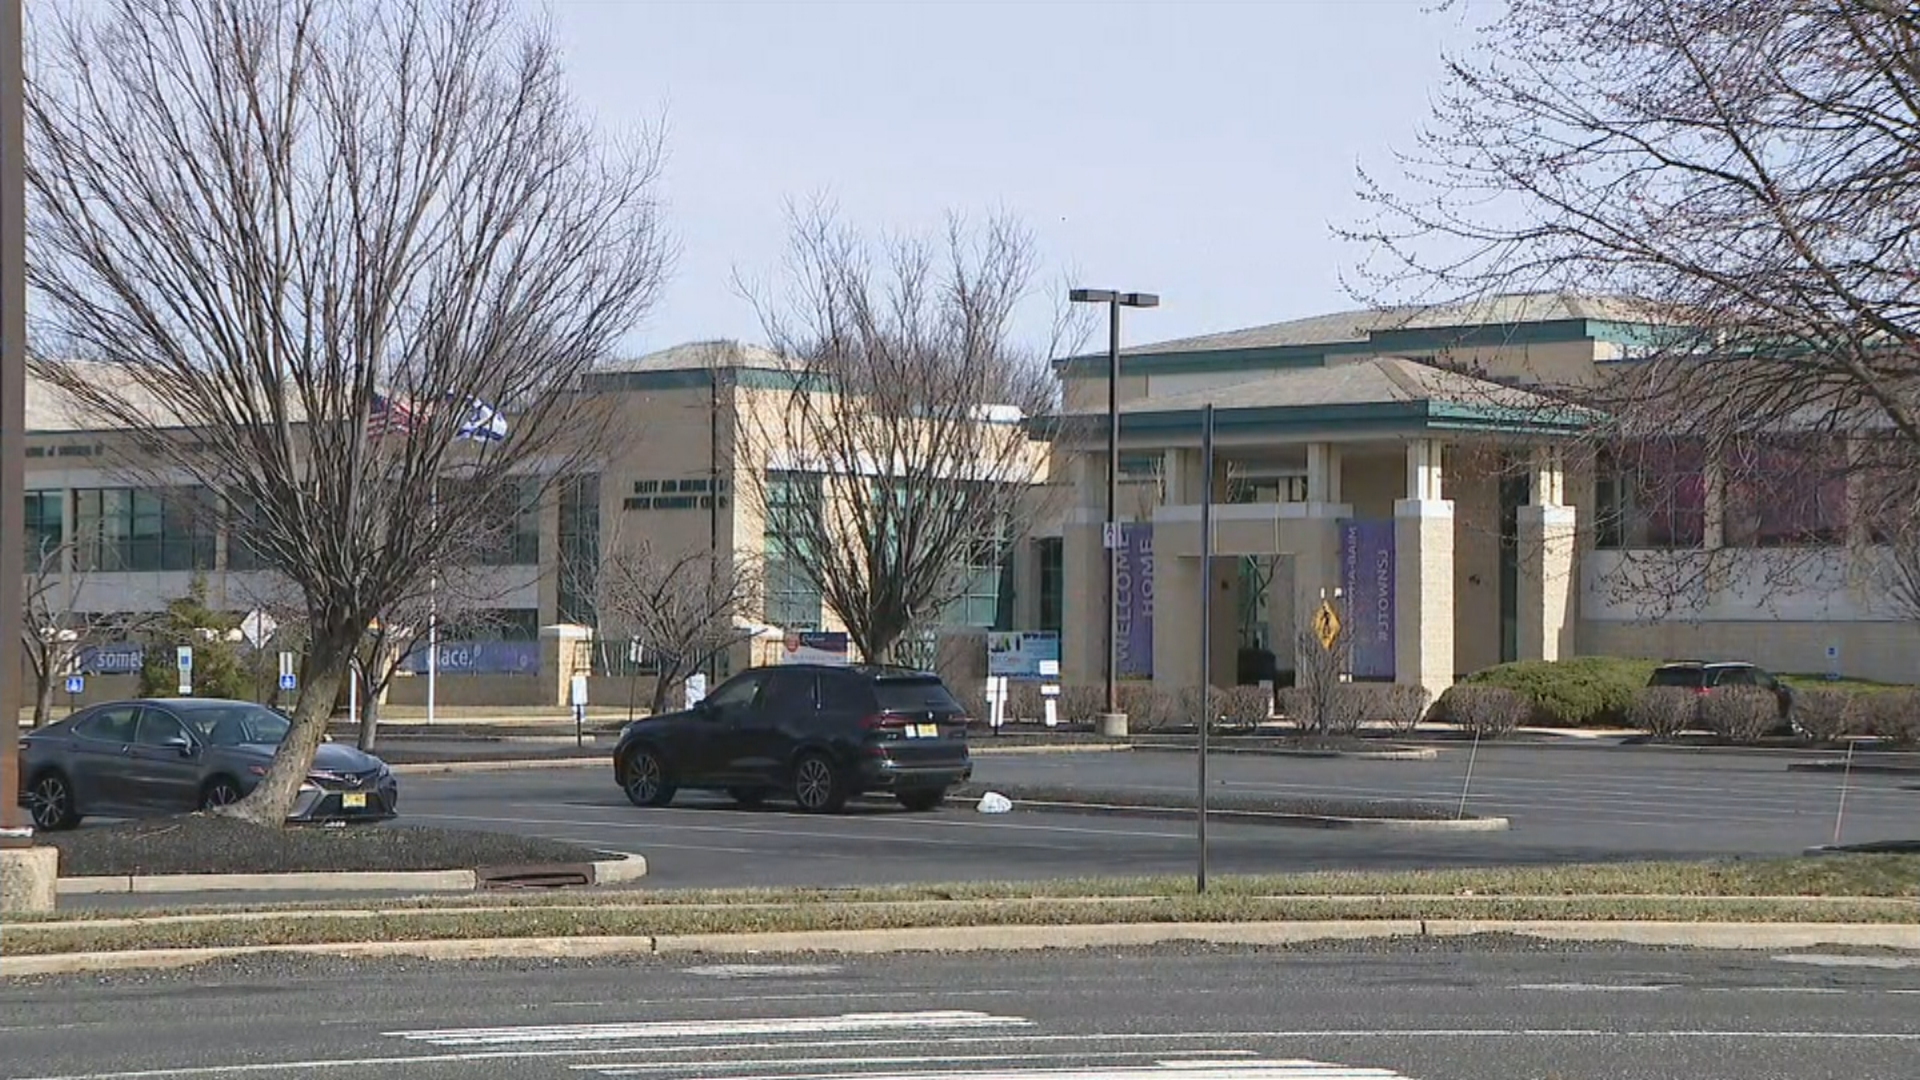 Katz Jewish Community Center In Cherry Hill Temporarily Closes Due To Security Threat